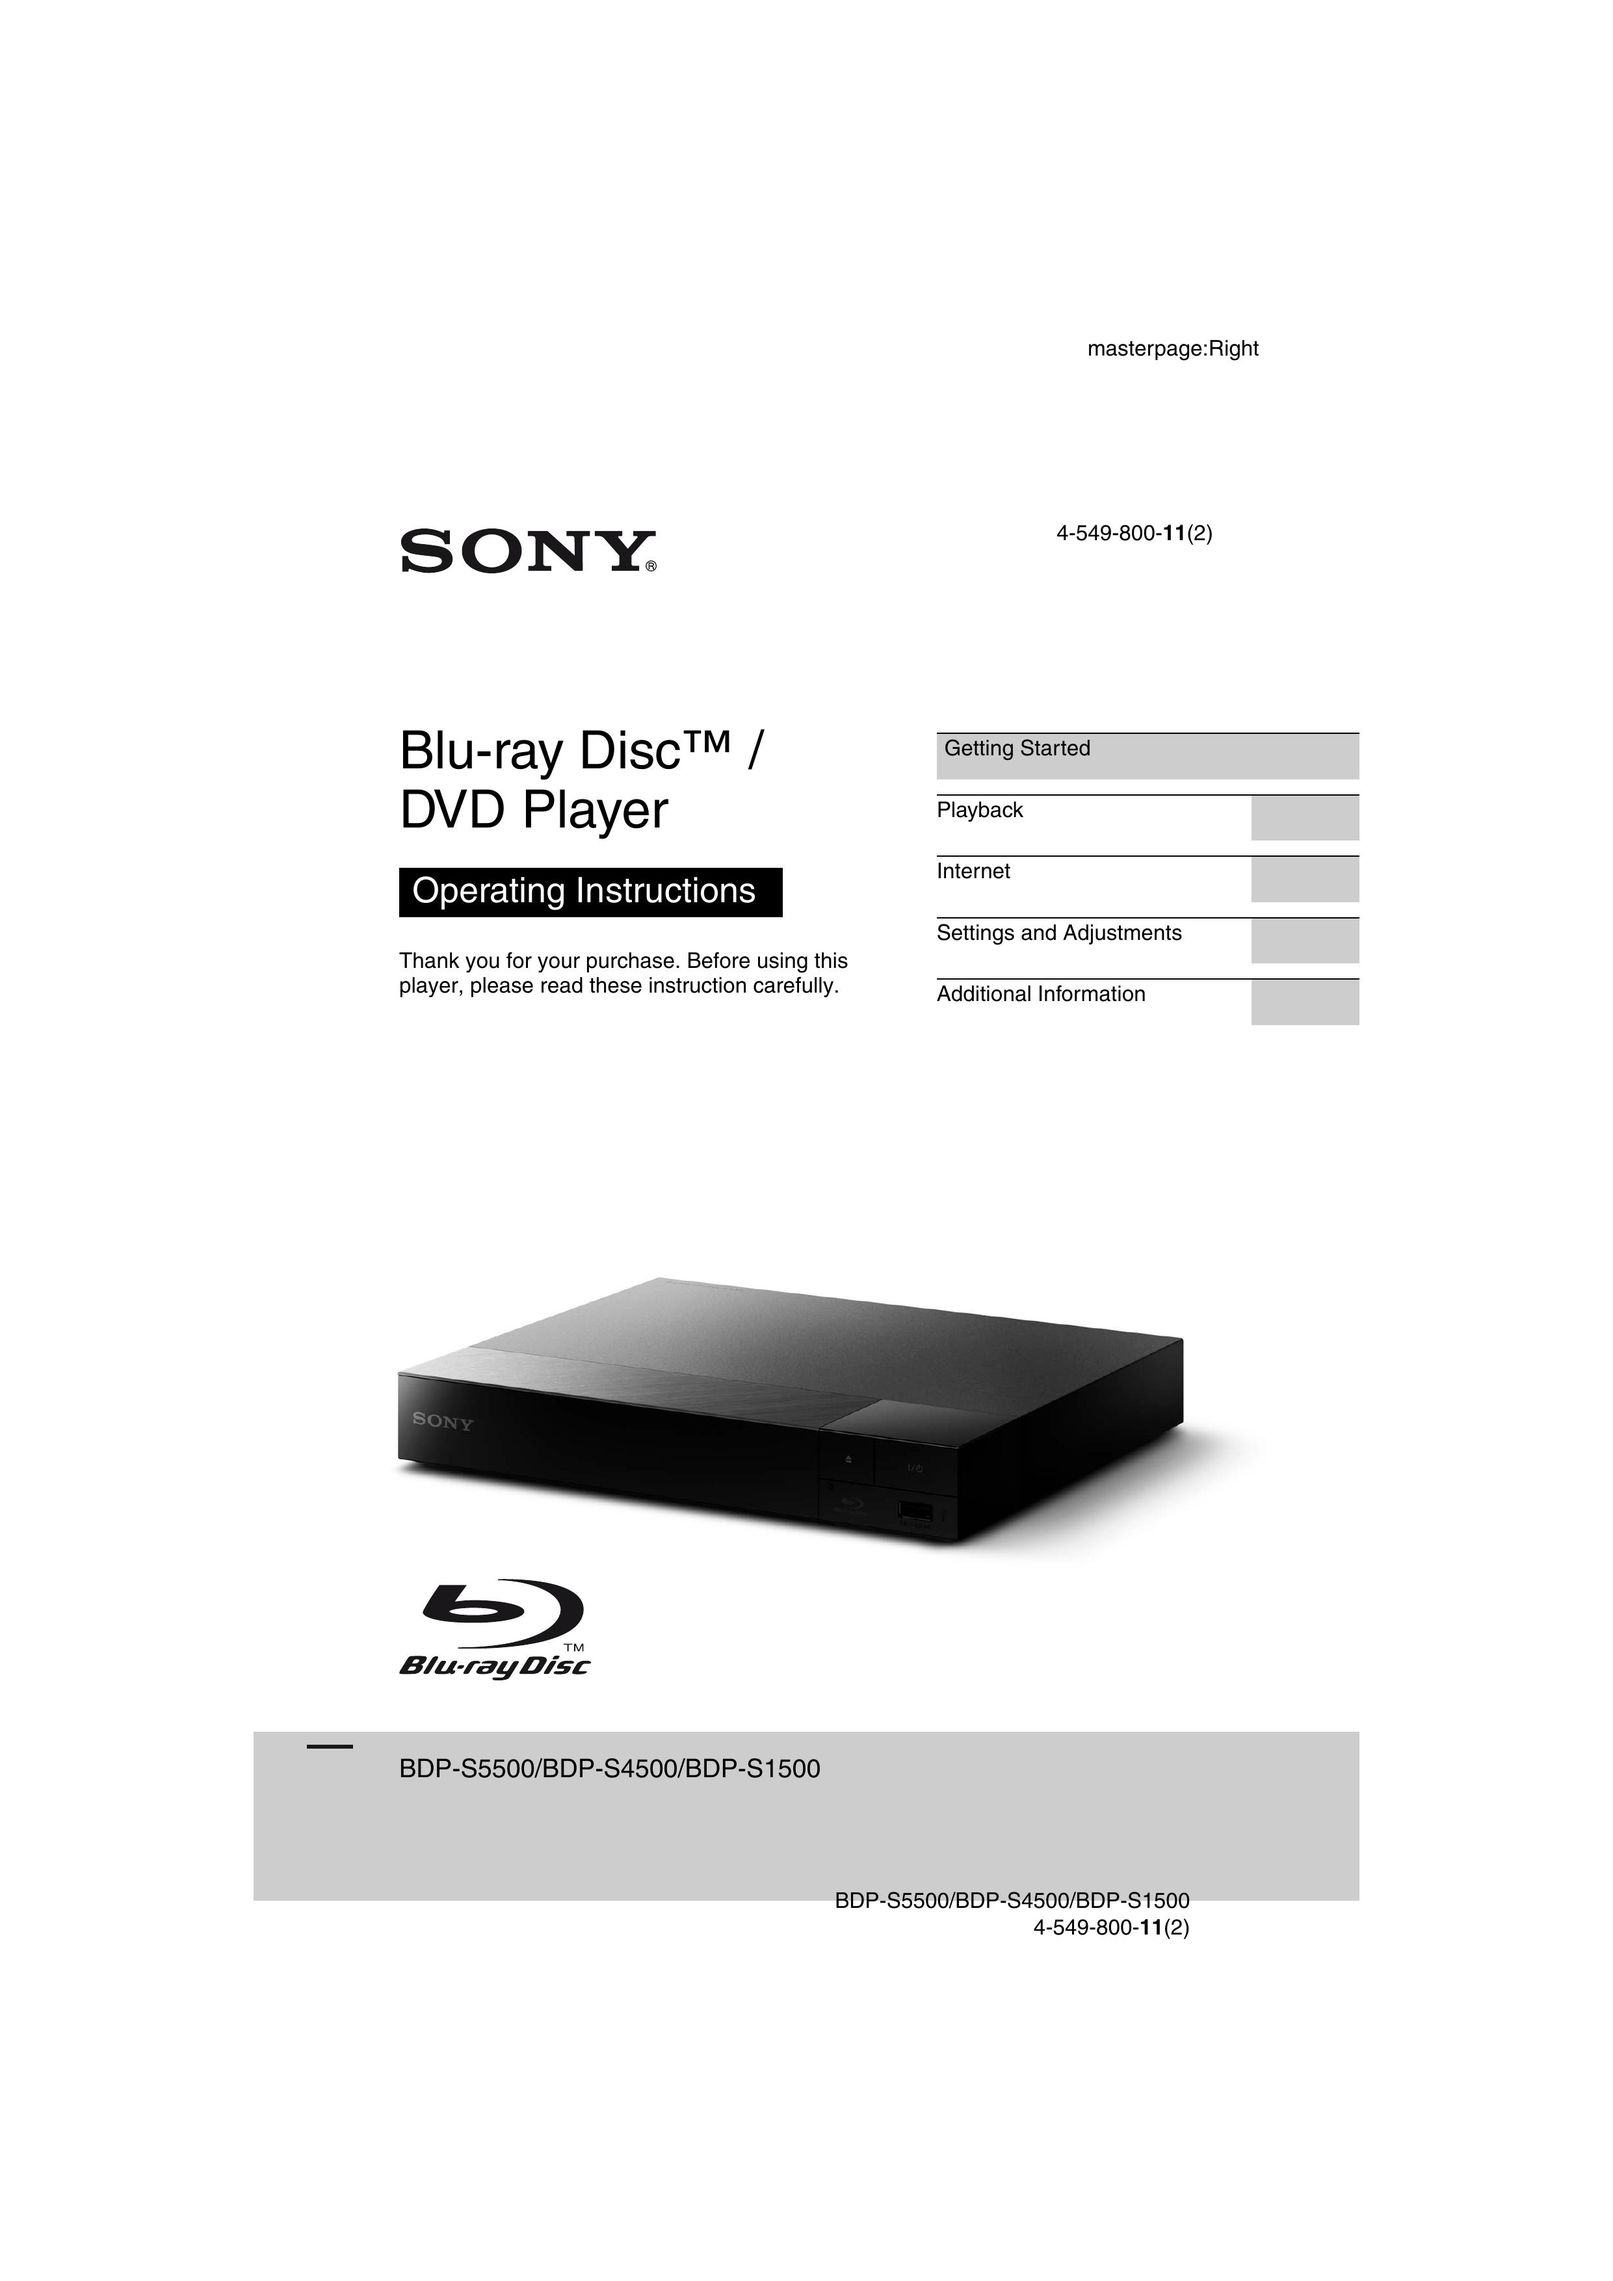 Sony BDP-S4500 Blu-ray Player User Manual